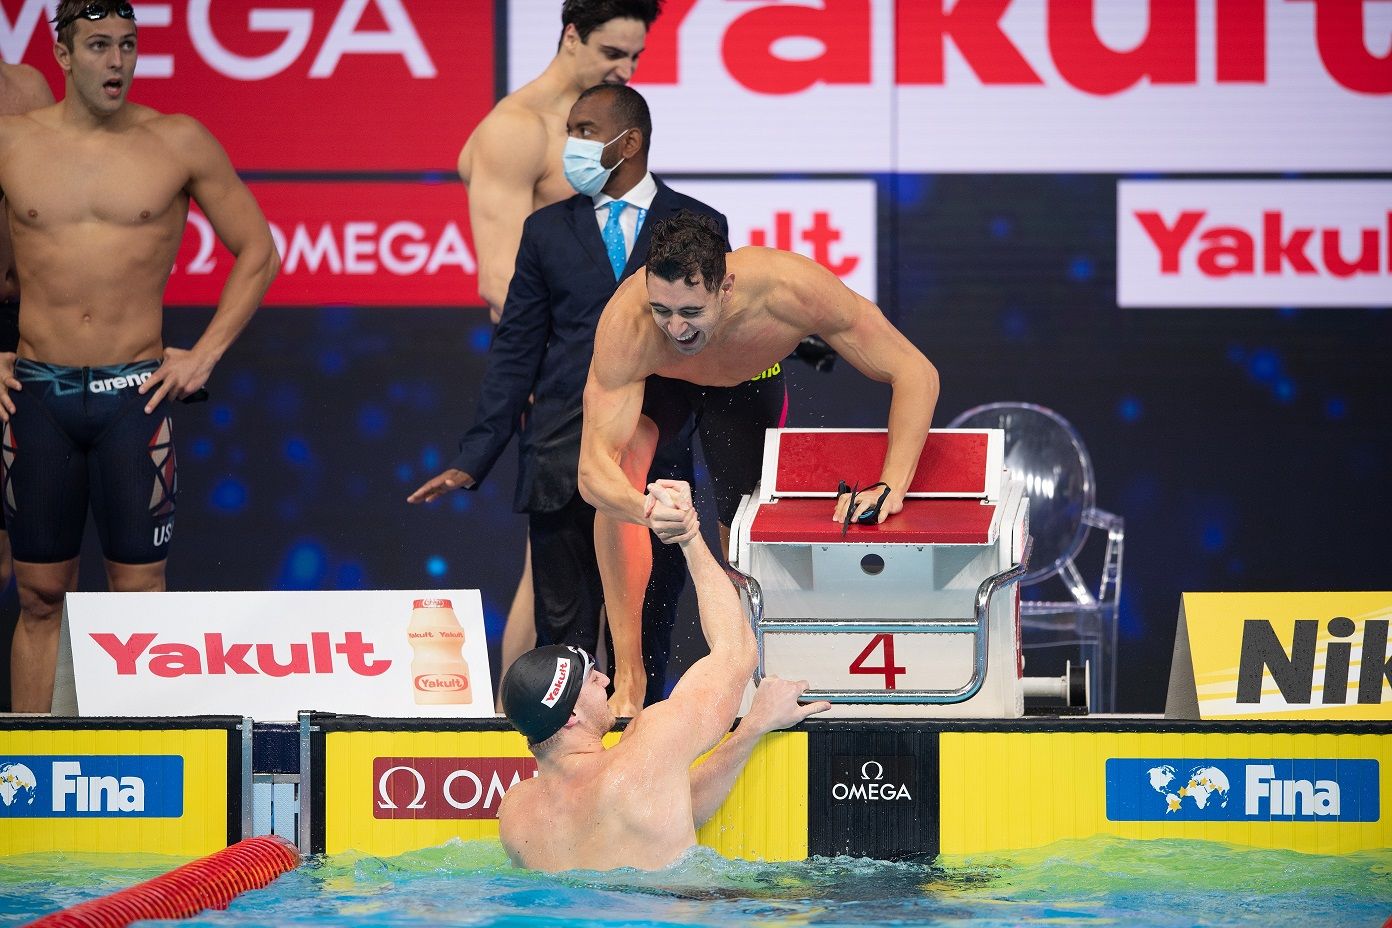 Records continue to be broken in Abu Dhabi's FINA World Swimming Championships